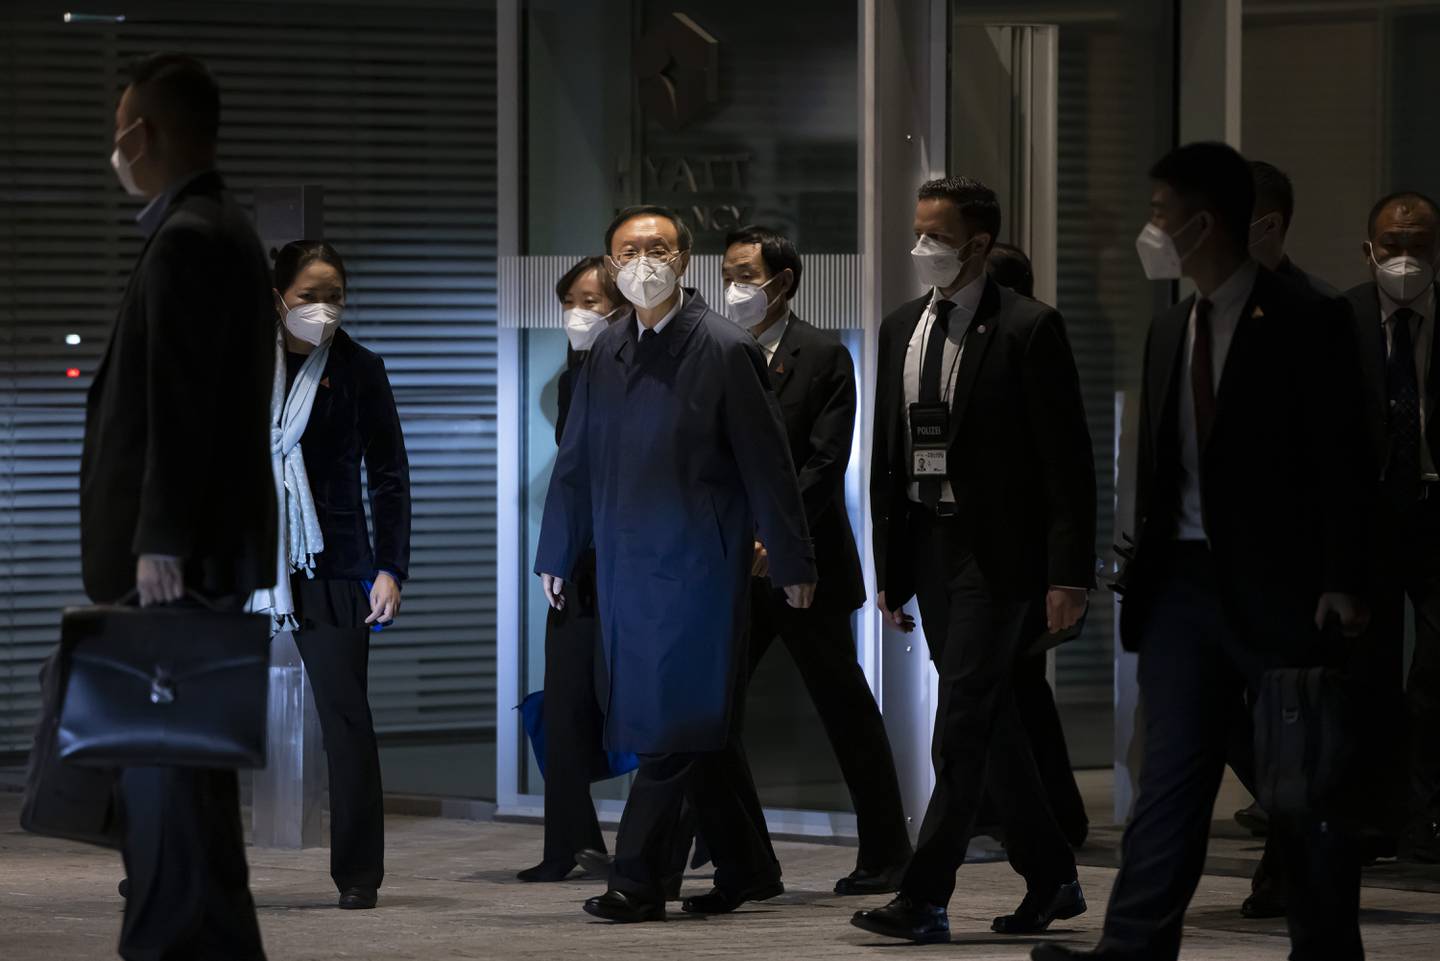 Senior Chinese foreign policy adviser Yang Jiechi and his delegation leave the Hyatt hotel at Zurich Airport, Switzerland, on October 6, 2021.   AP